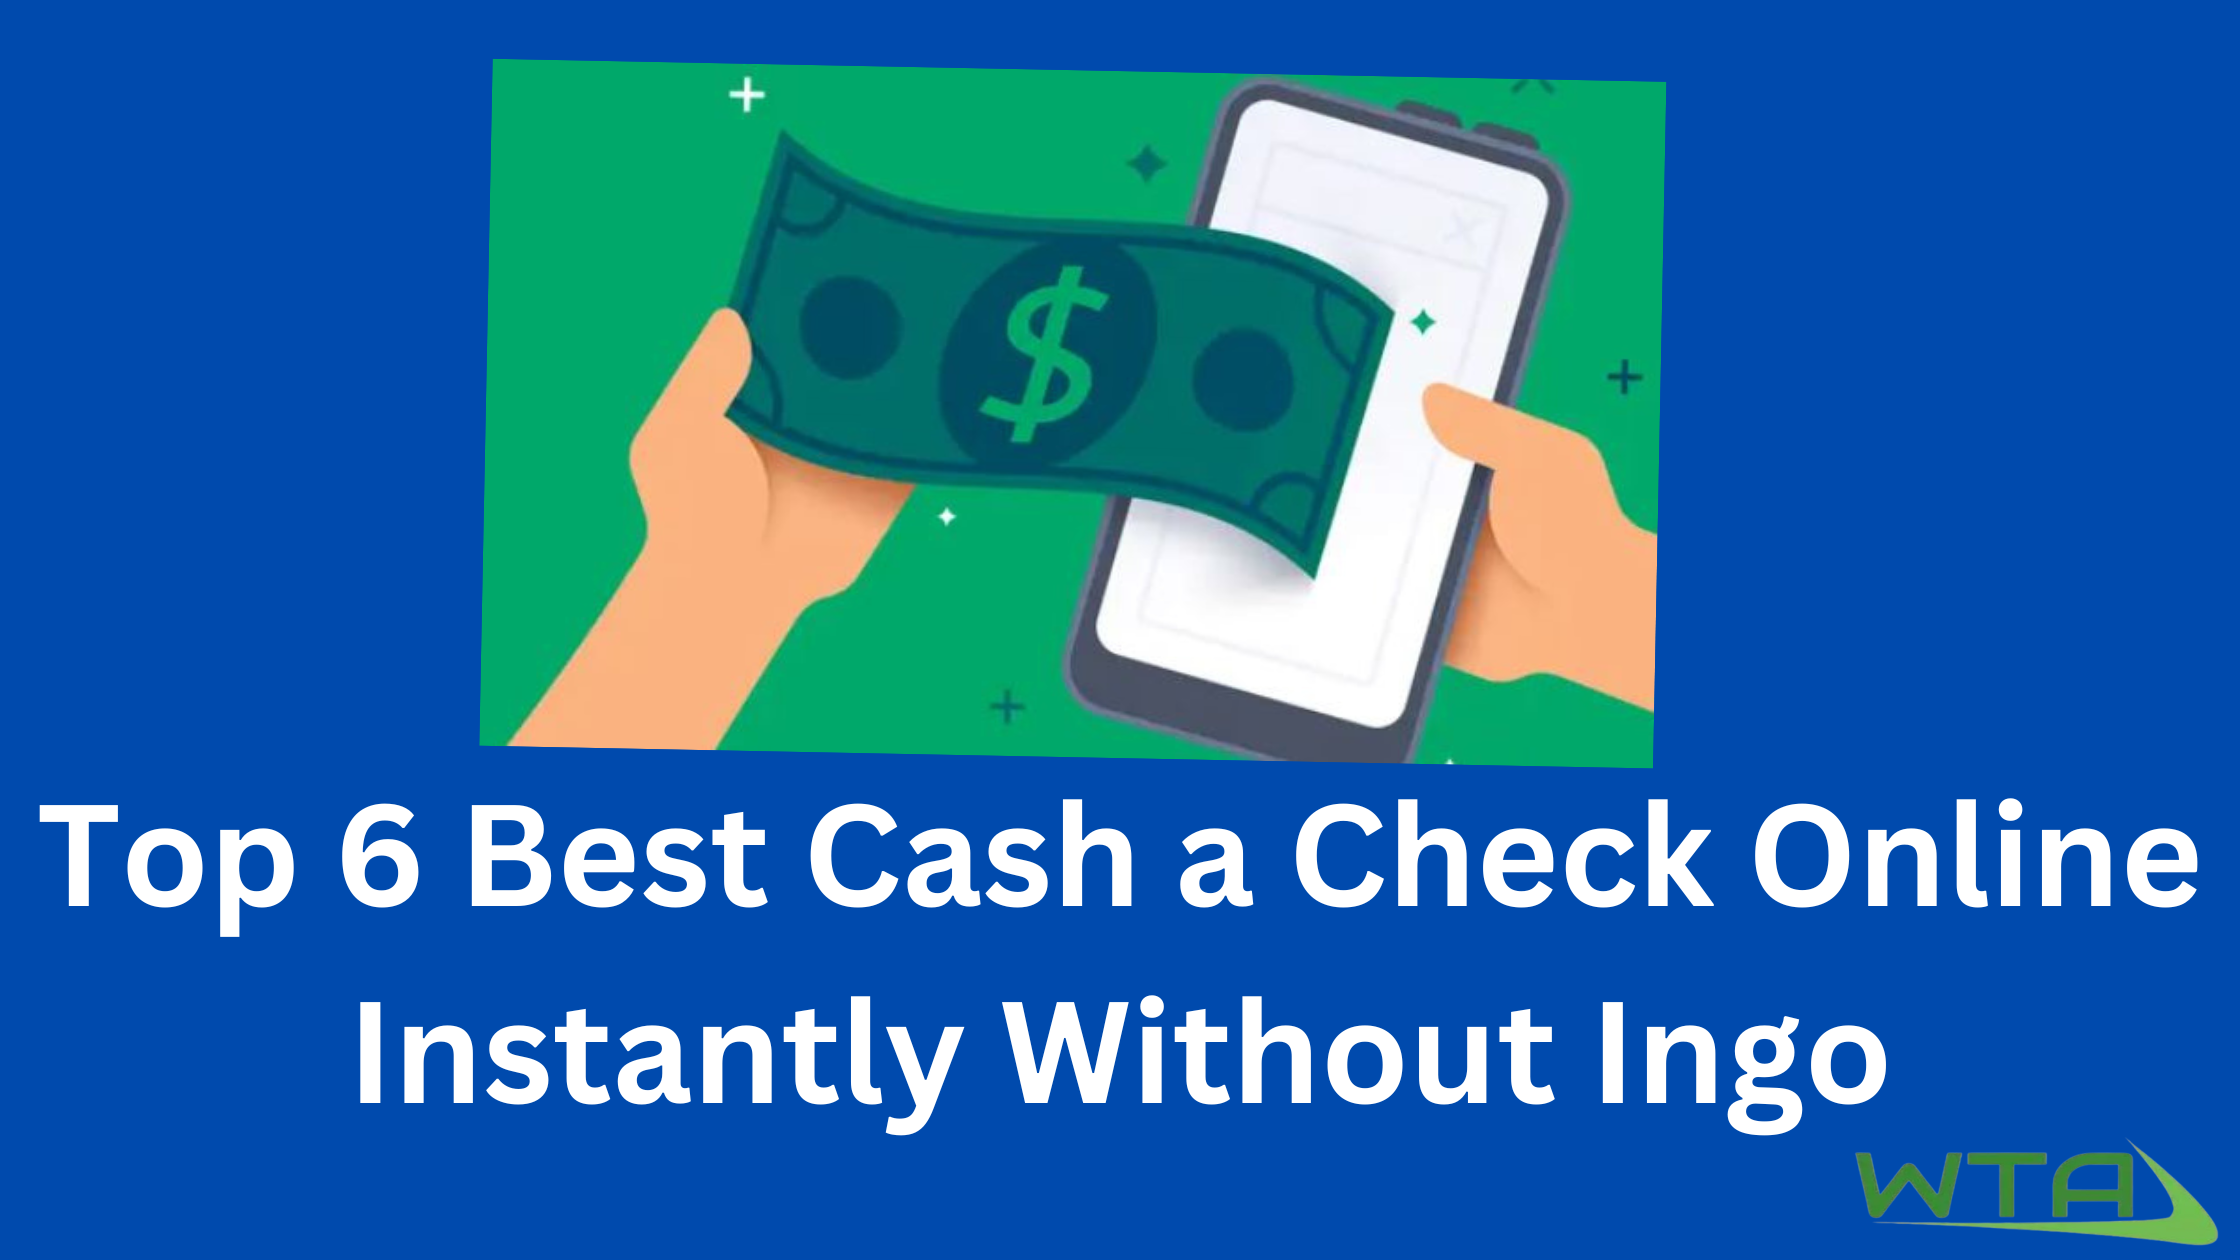 Cash a Check Online Instantly Without Ingo